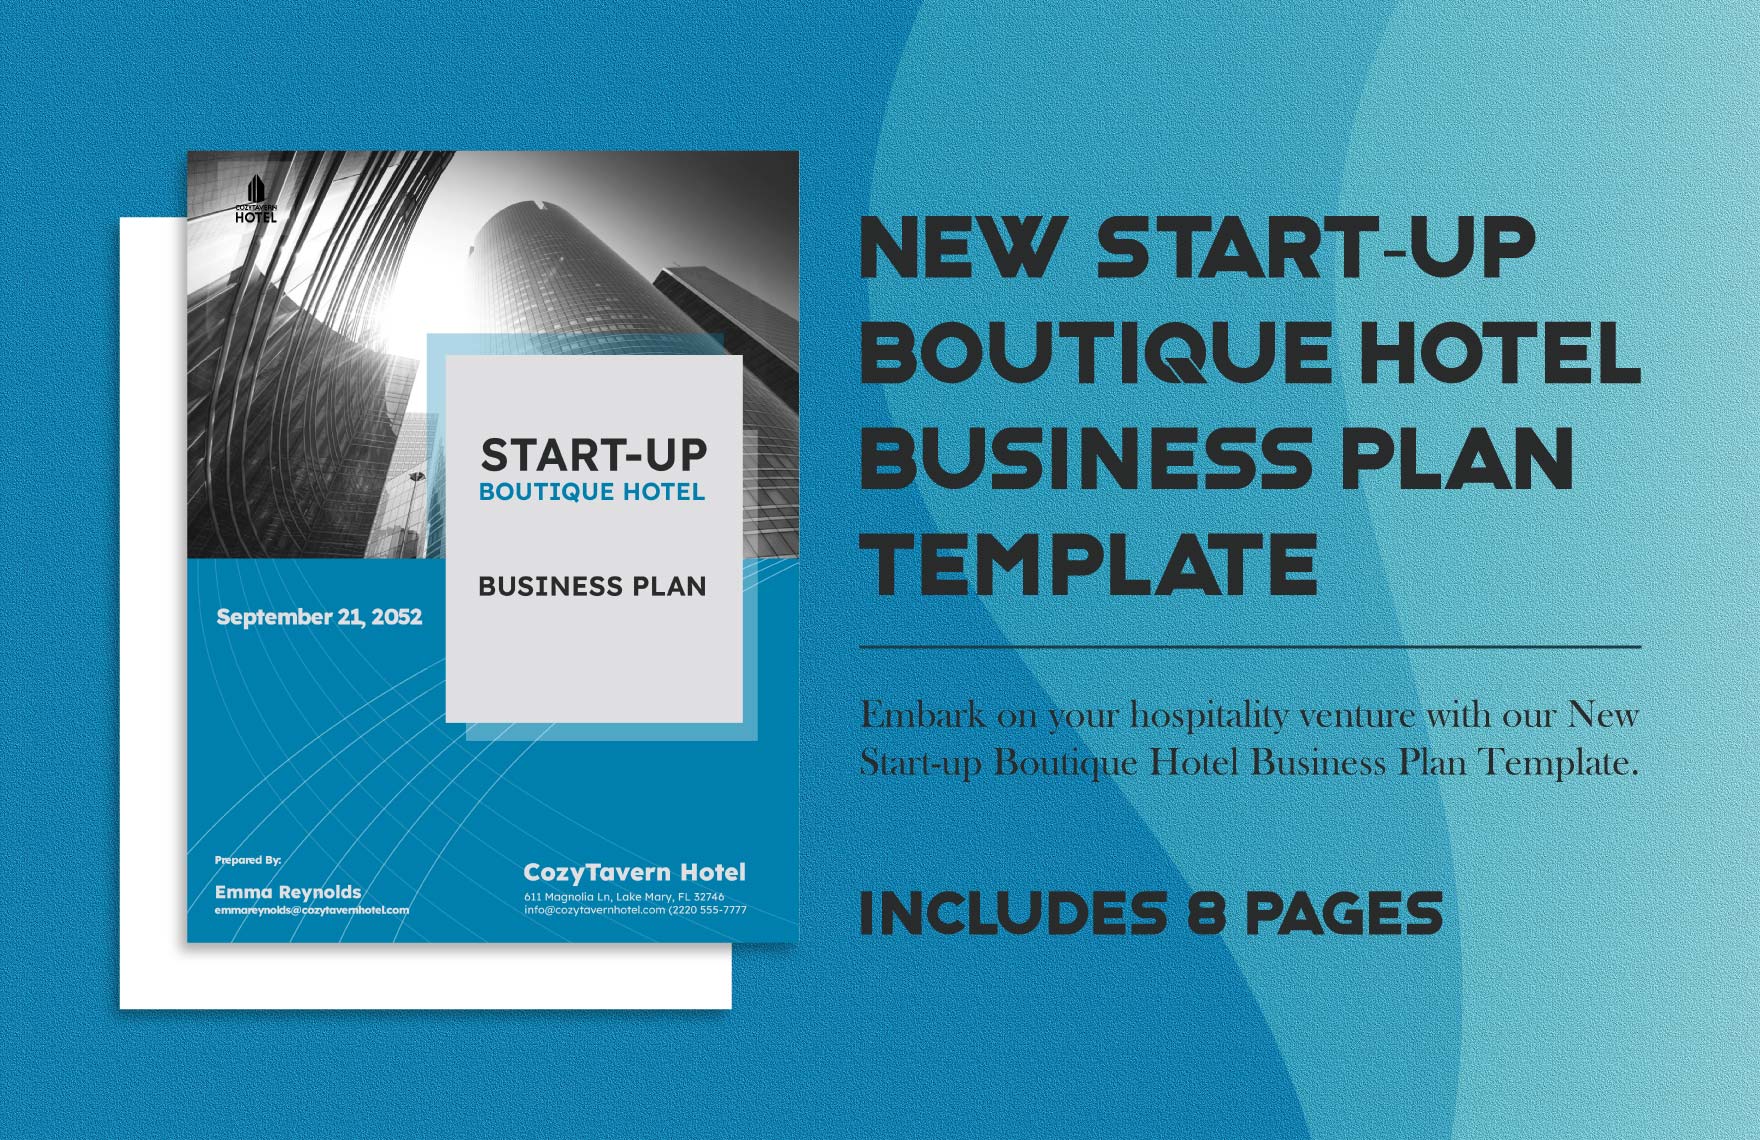 new-start-up-boutique-hotel-business-plan-template